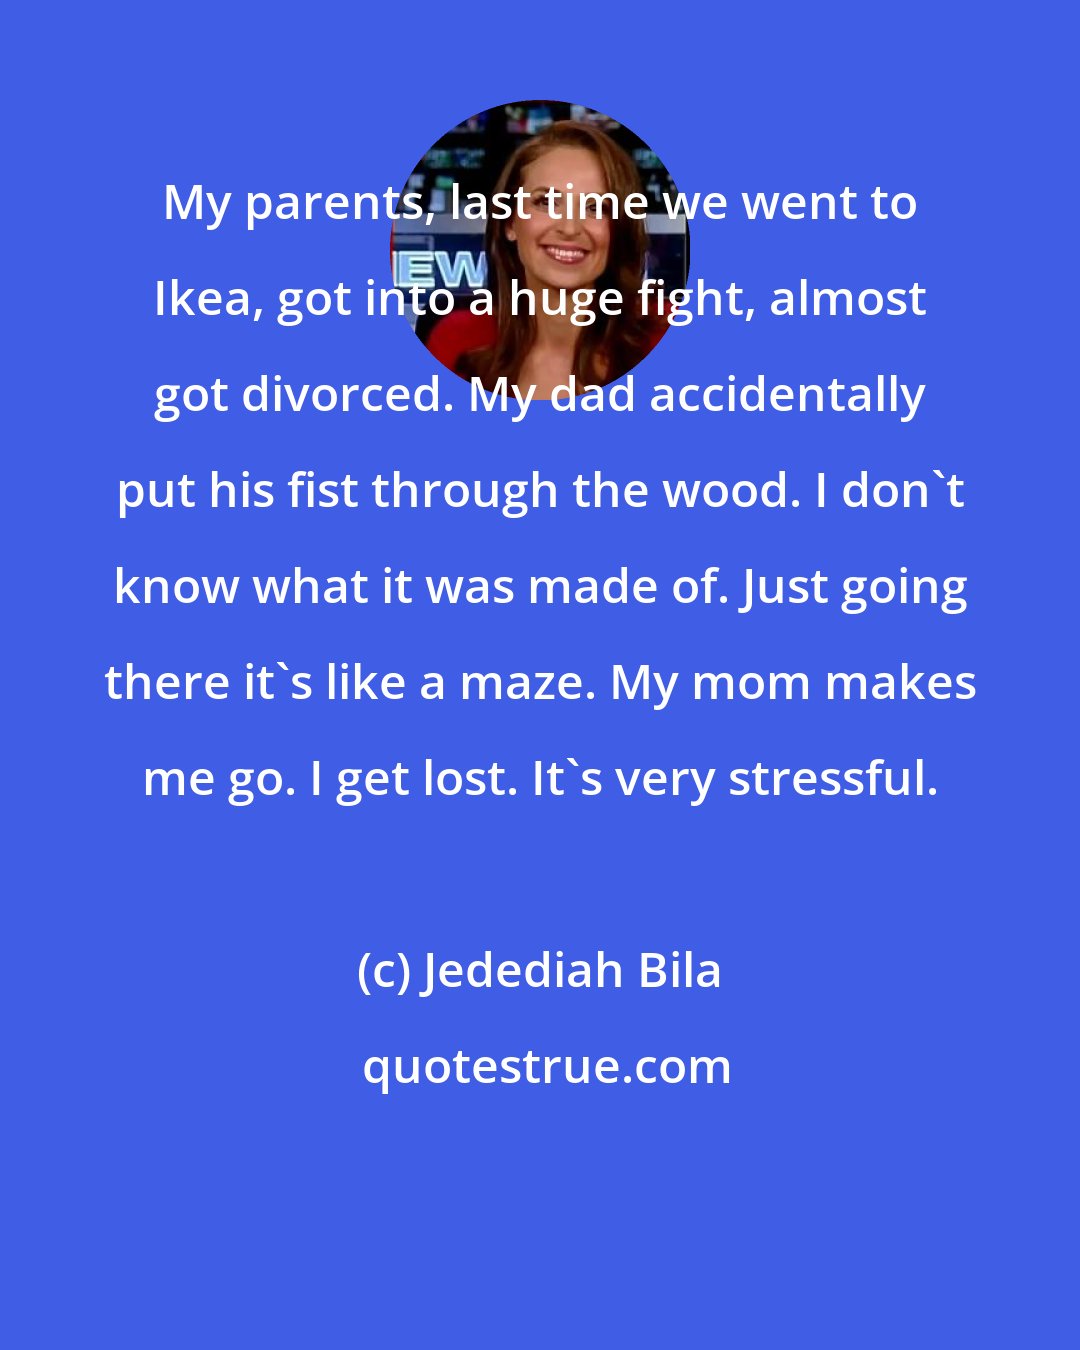 Jedediah Bila: My parents, last time we went to Ikea, got into a huge fight, almost got divorced. My dad accidentally put his fist through the wood. I don't know what it was made of. Just going there it's like a maze. My mom makes me go. I get lost. It's very stressful.